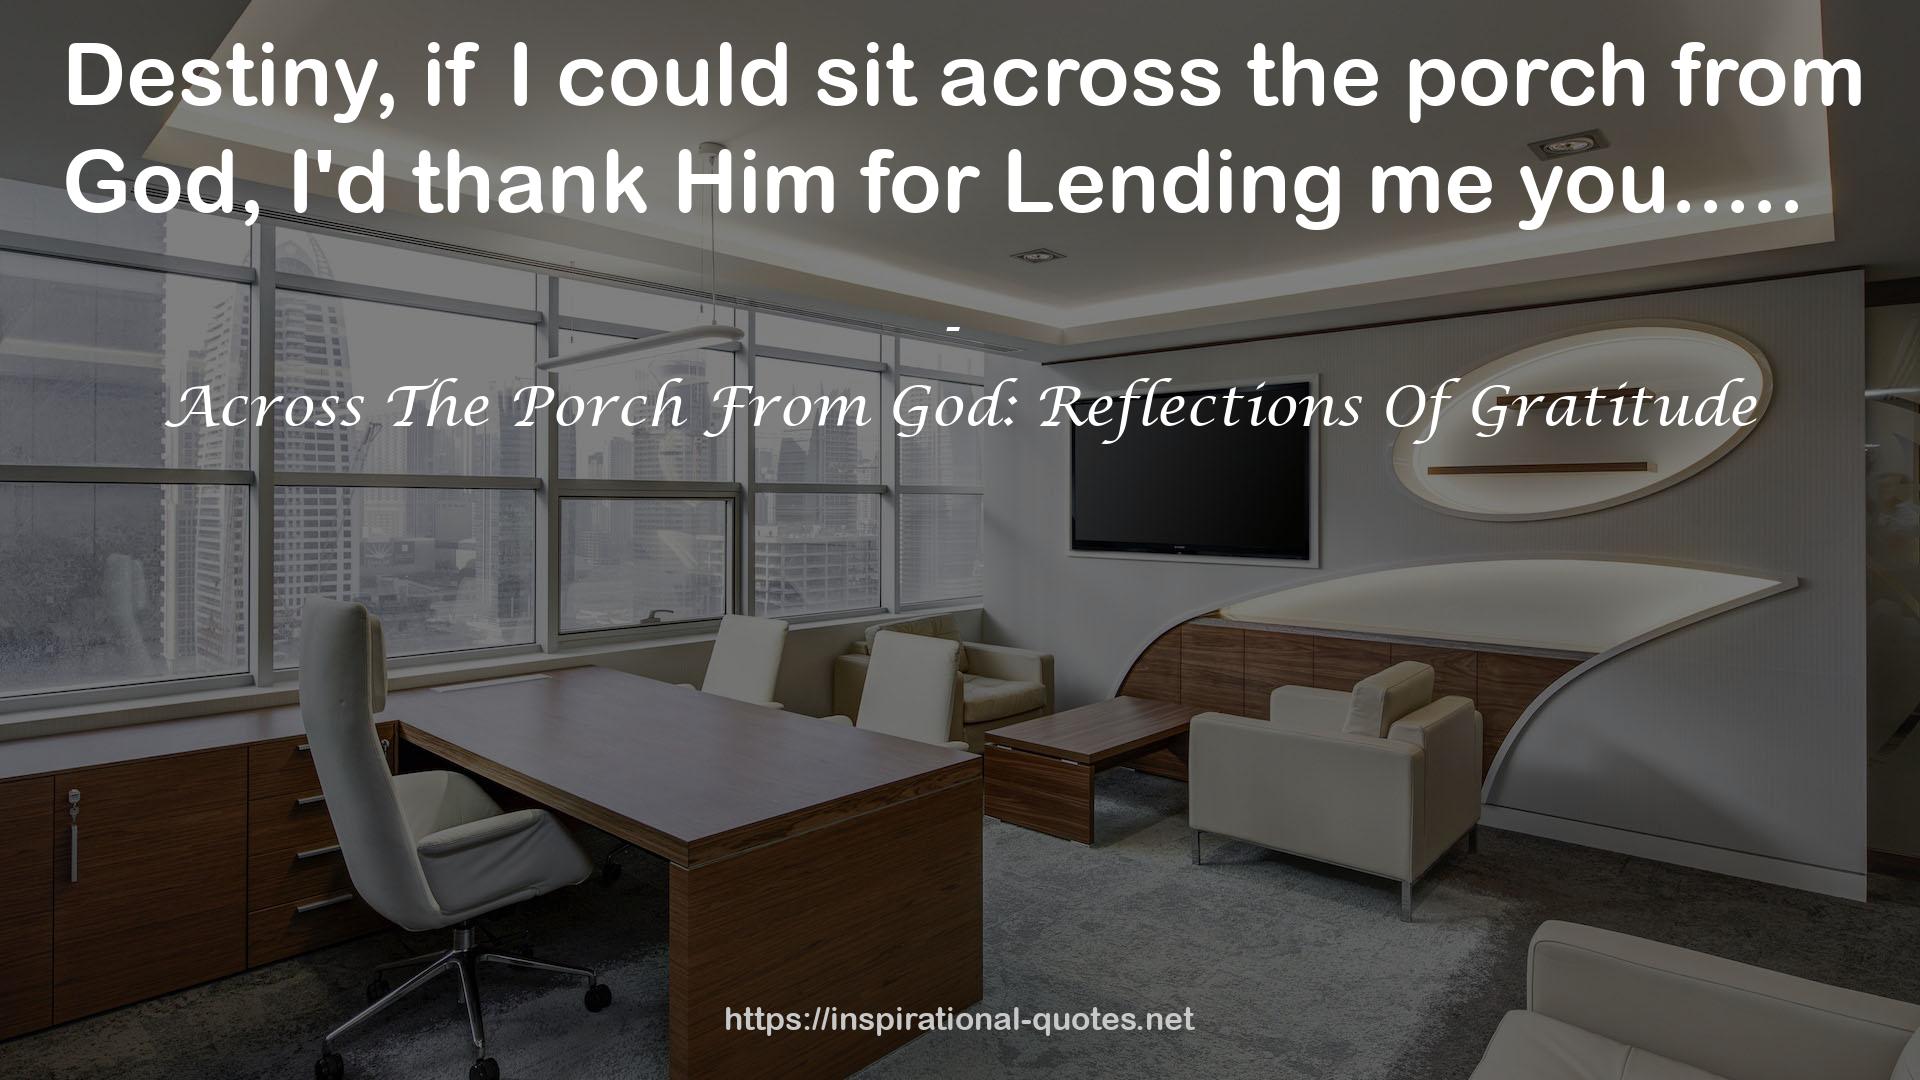 Across The Porch From God: Reflections Of Gratitude QUOTES